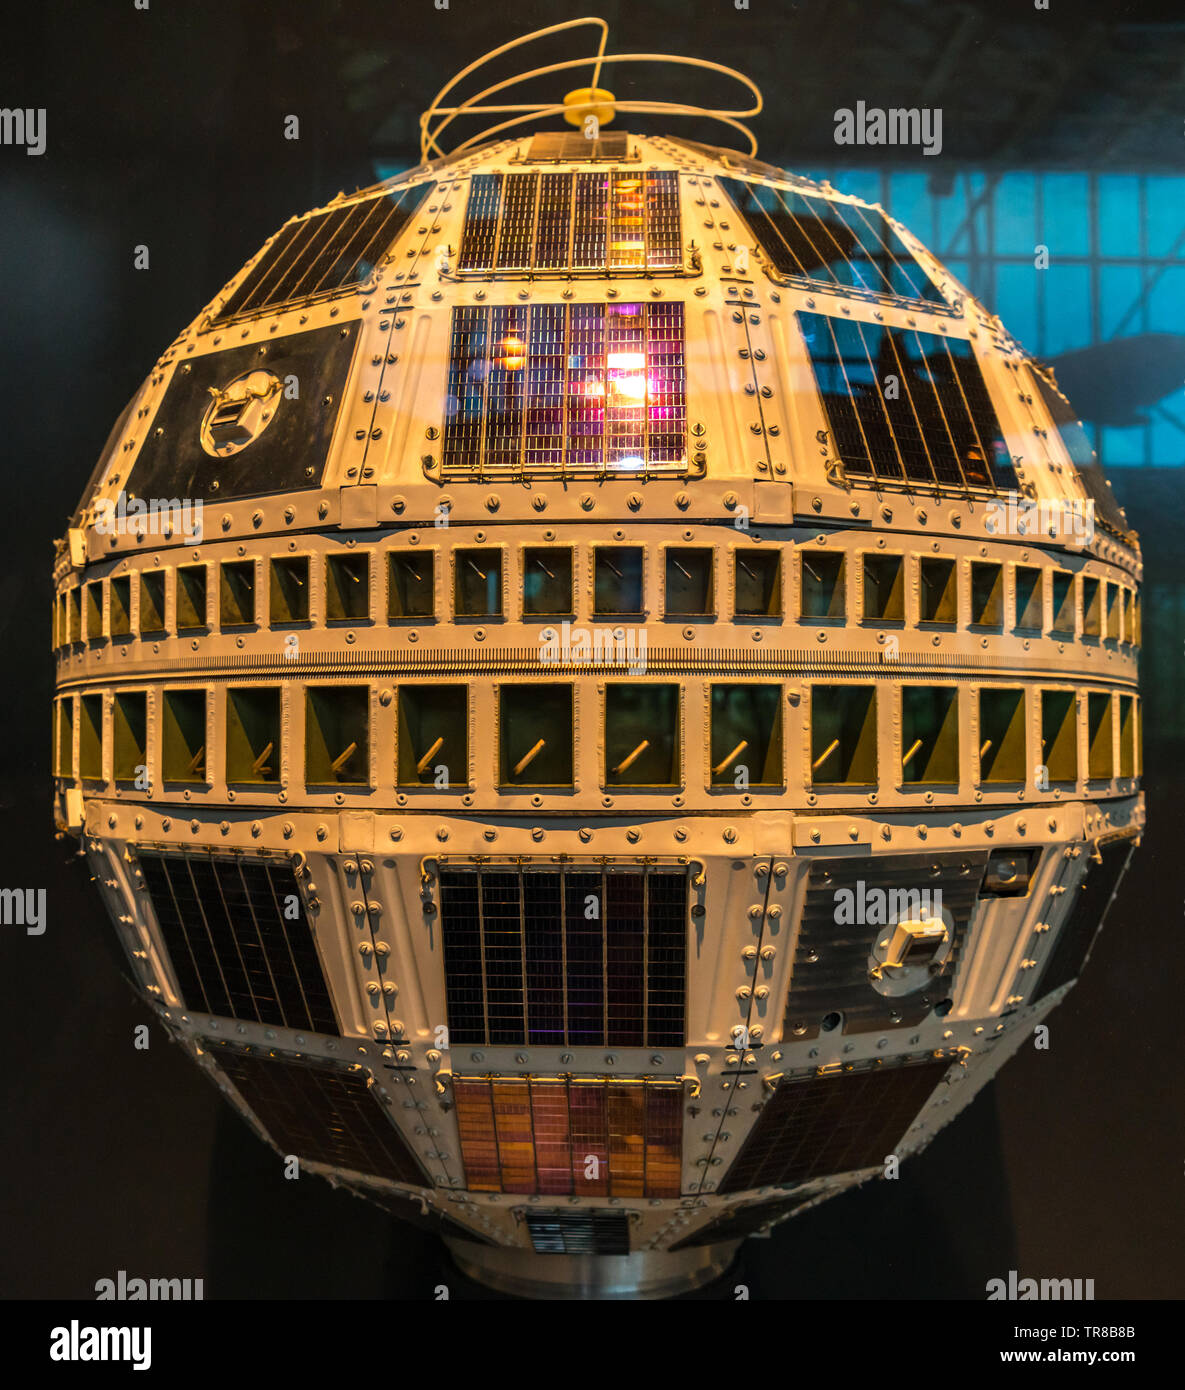 Telstar 1 - first active communications satellite, began an era of live international television after its launch on July 10, 1962. Stock Photo